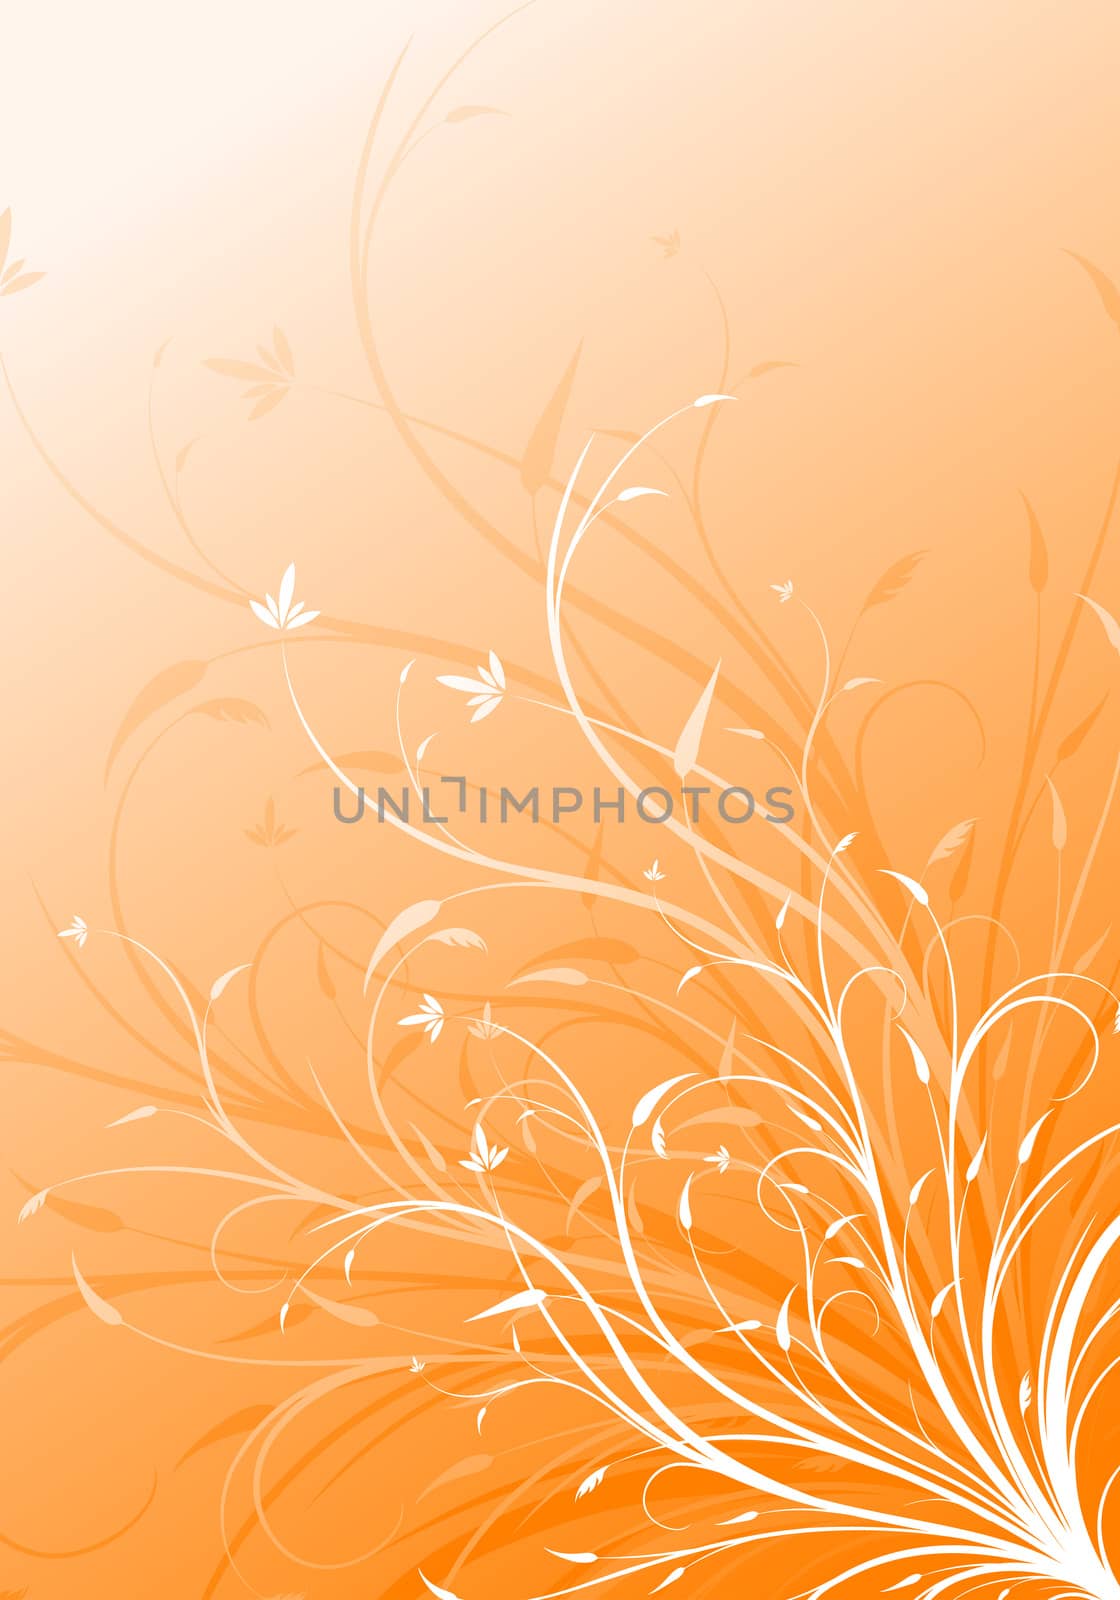 abstract spring floral decorative background vector illustration